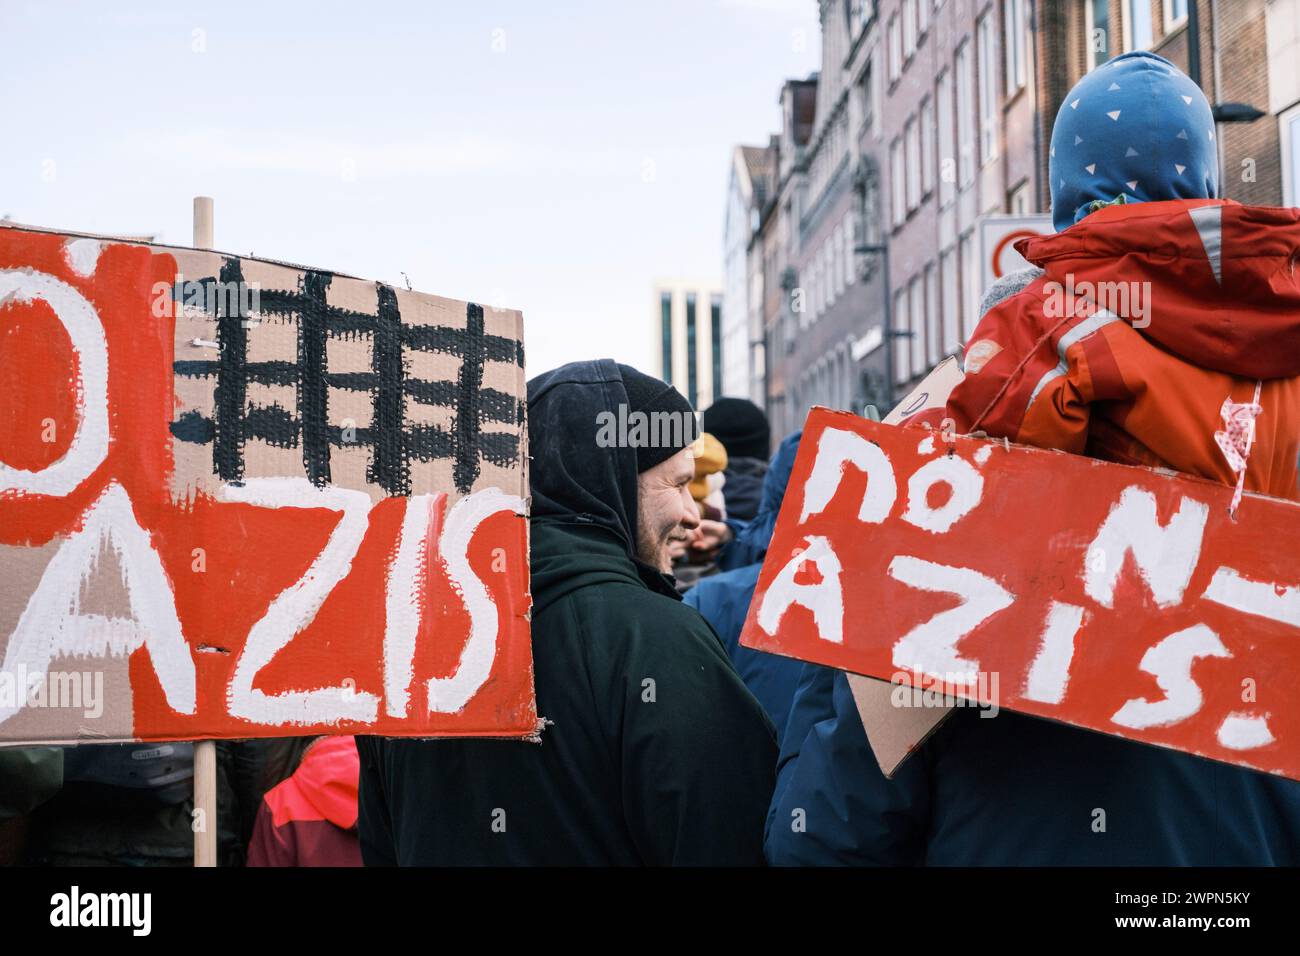 No Nazis signs at demonstration against the right in Lübeck Stock Photo